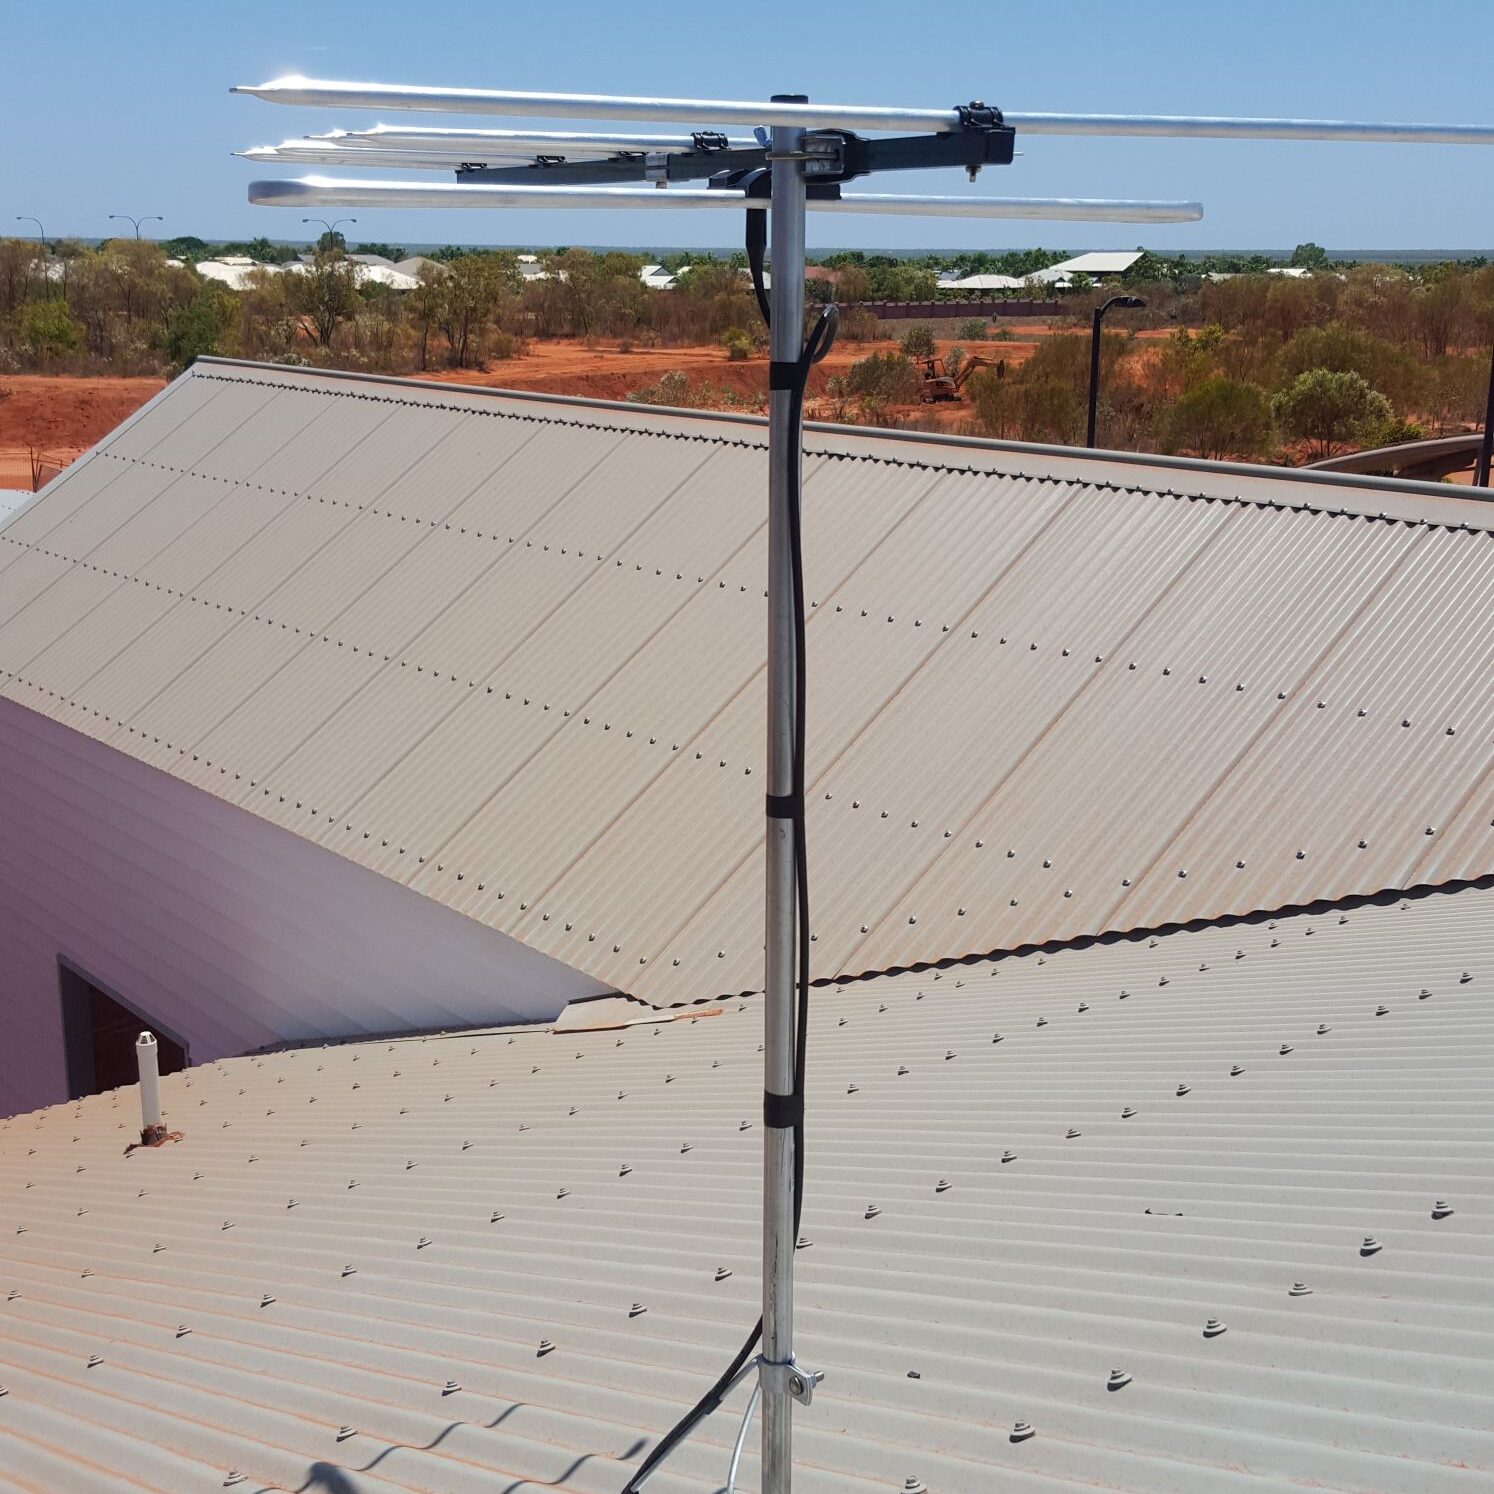 New Broome RFDS building Antenna system